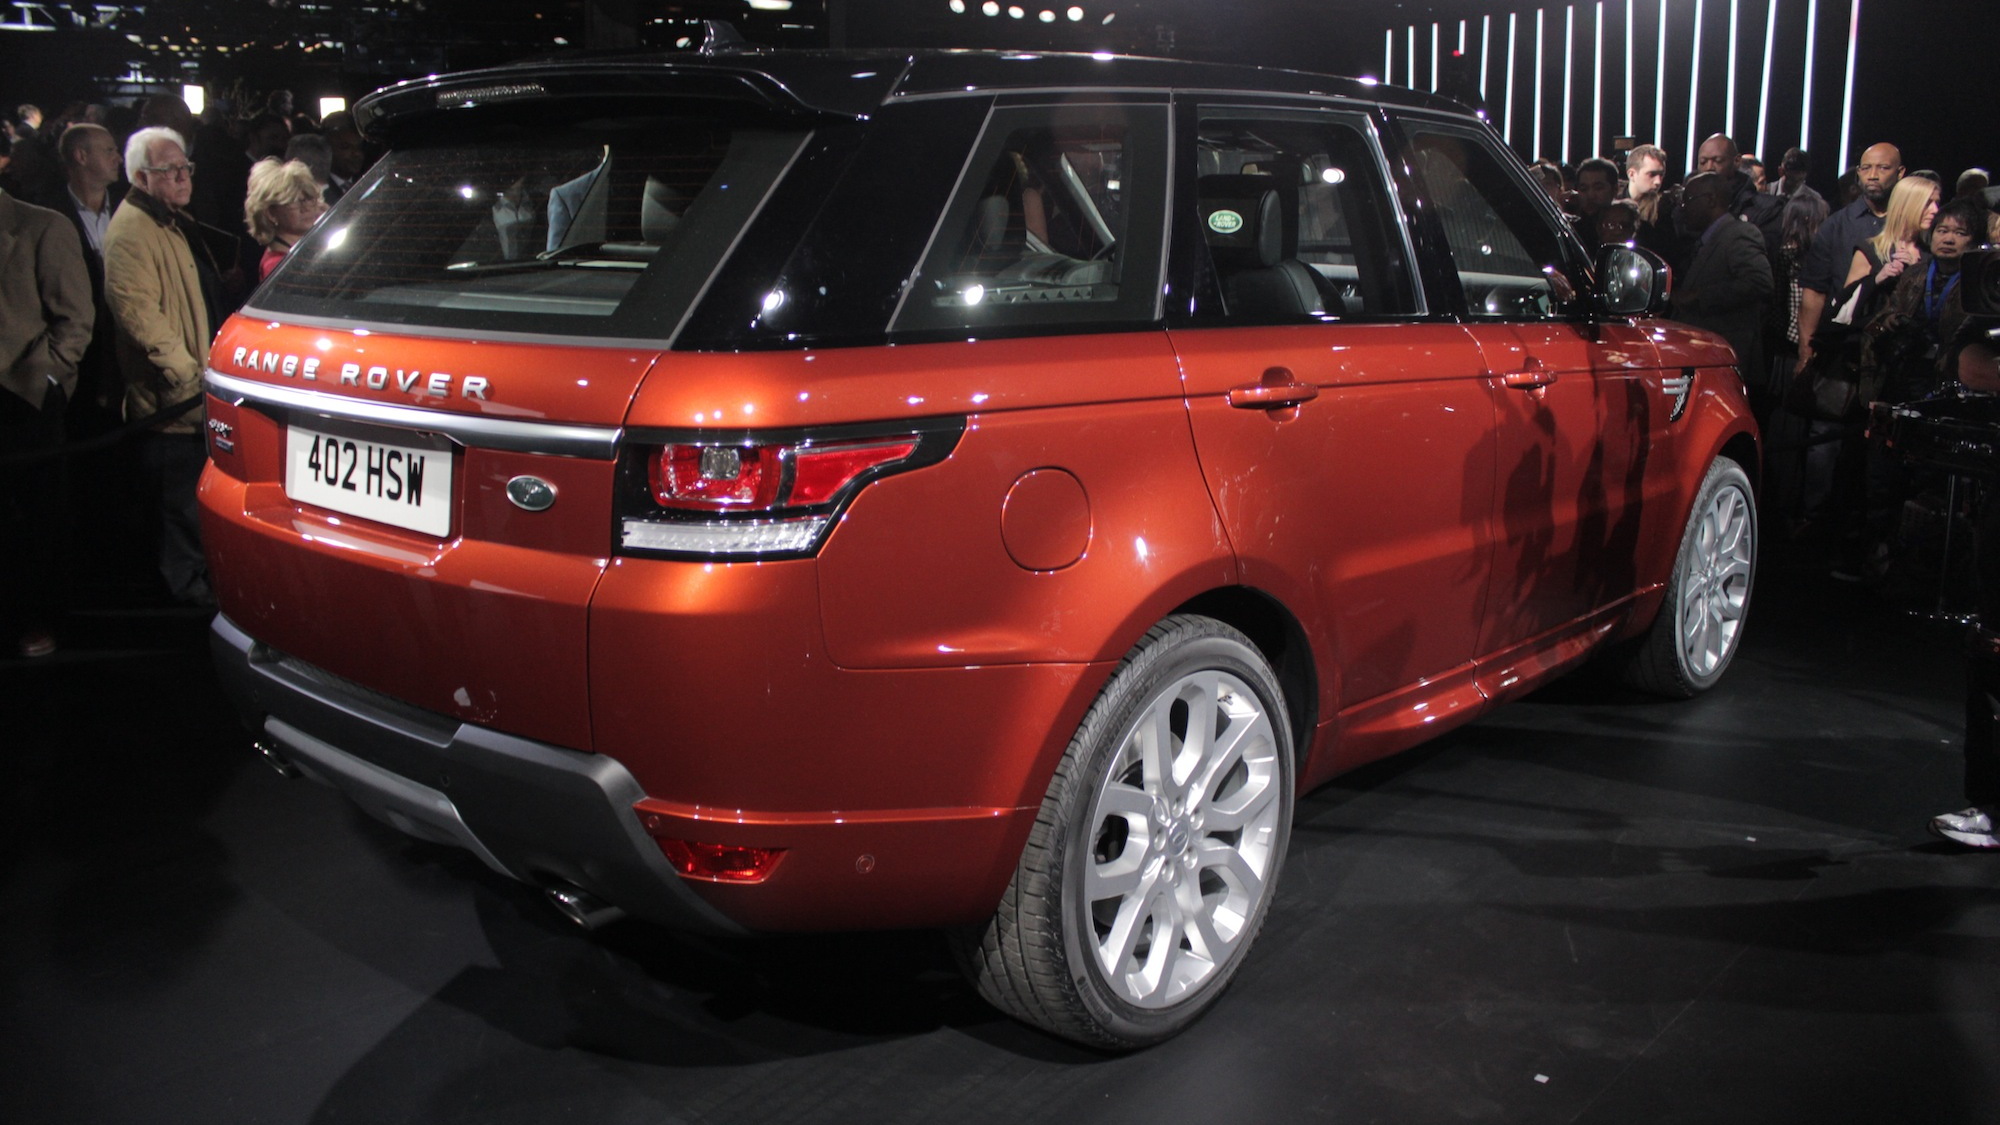 2014 Land Rover Range Rover Sport, private preview event in NYC